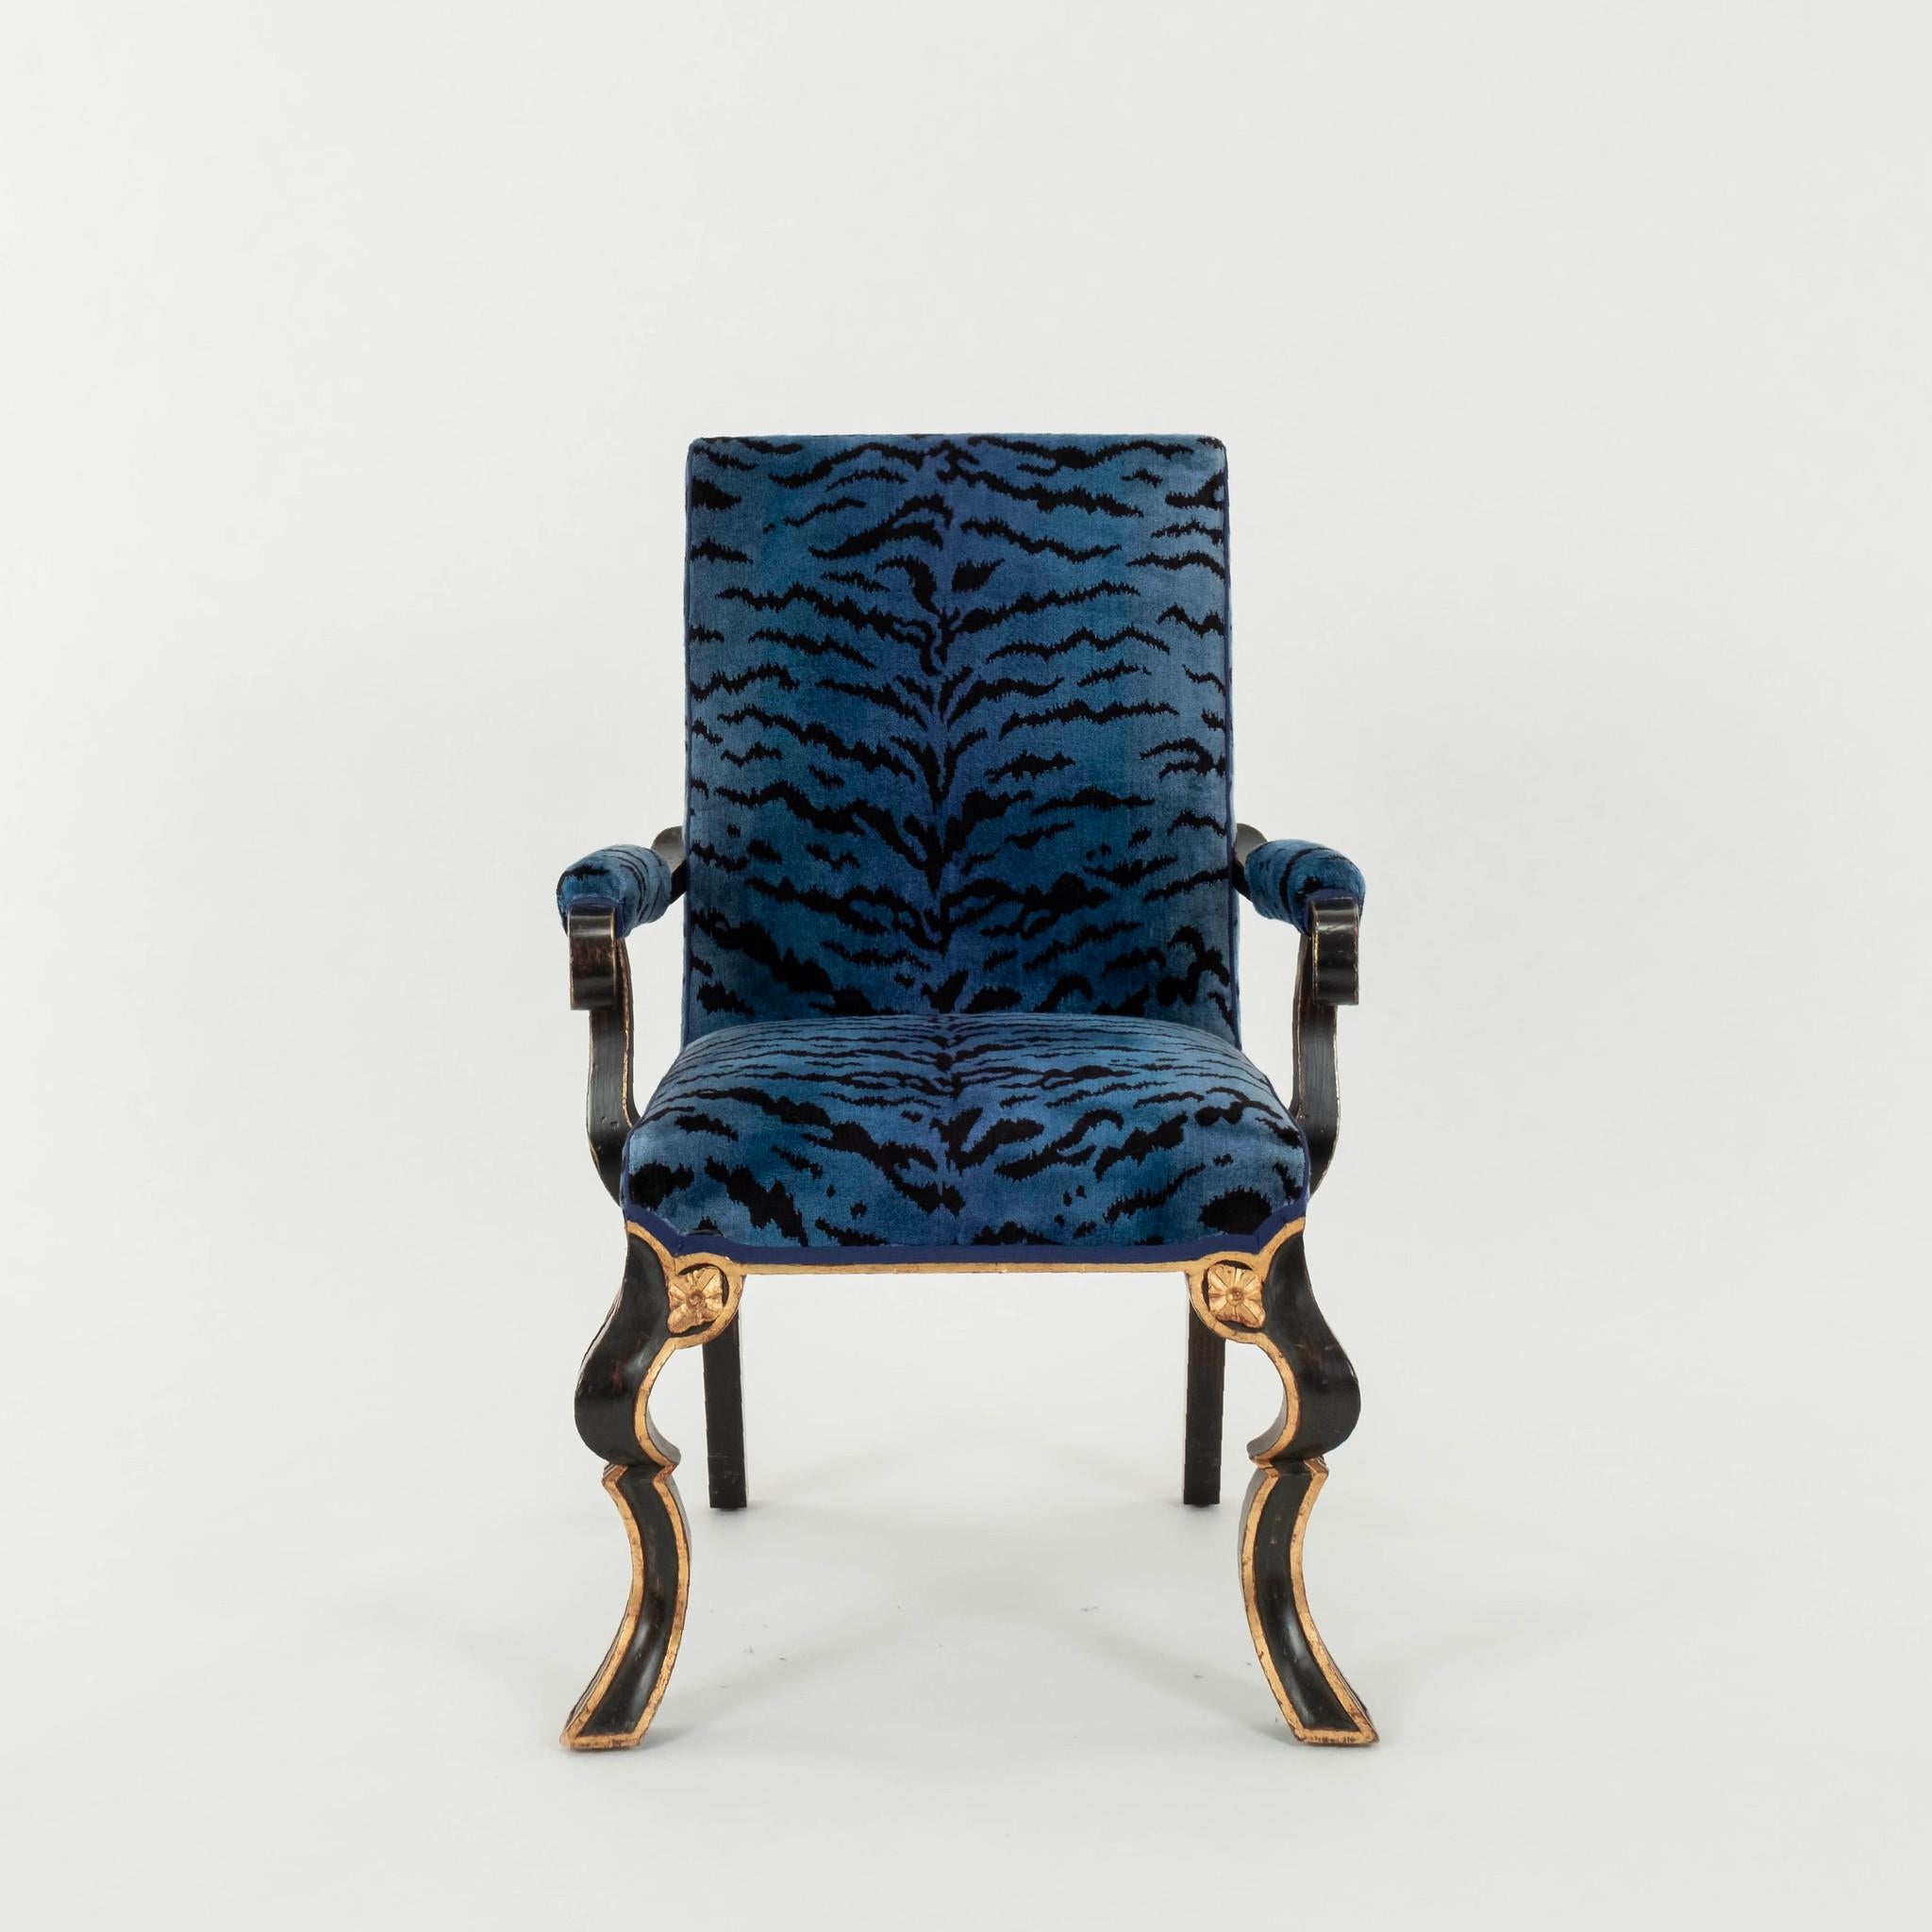 American Rose Tarlow Melrose House Puccini Blue Scalamandré Tigre Velvet Armchair(s) For Sale